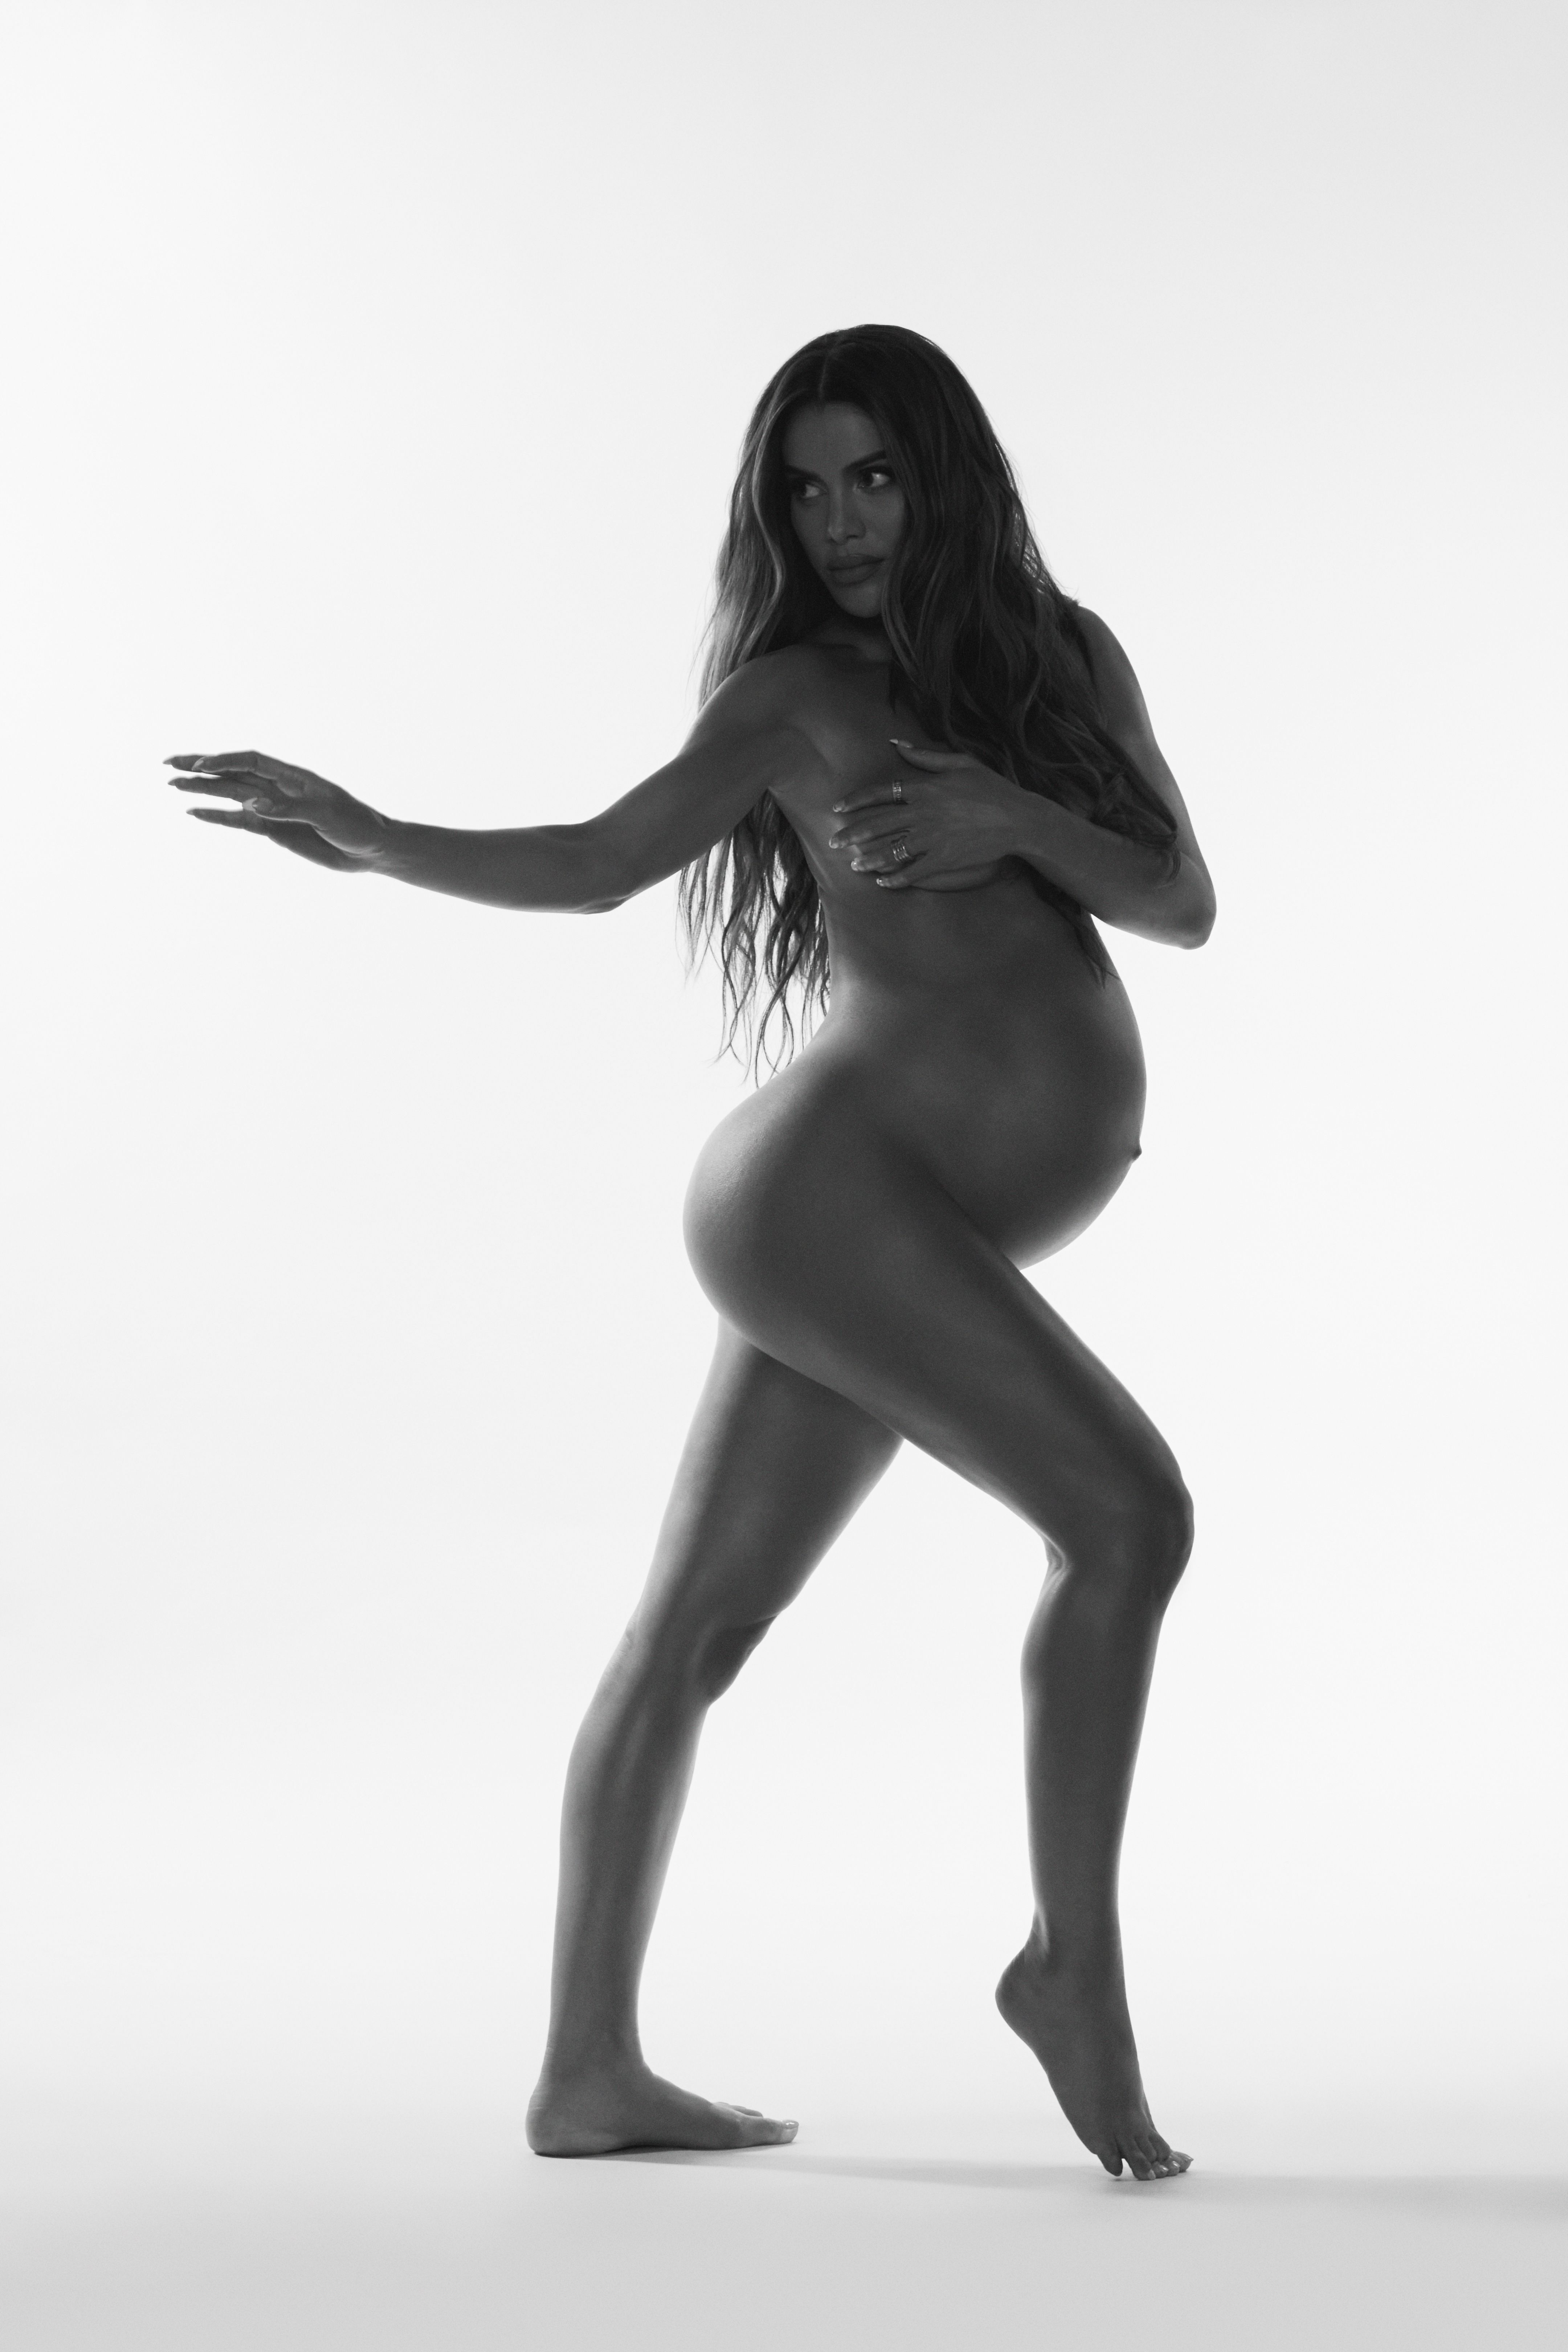 Camila Coelho Shares Her 9-Month Maternity Shoot and Discusses Pregnancy image photo